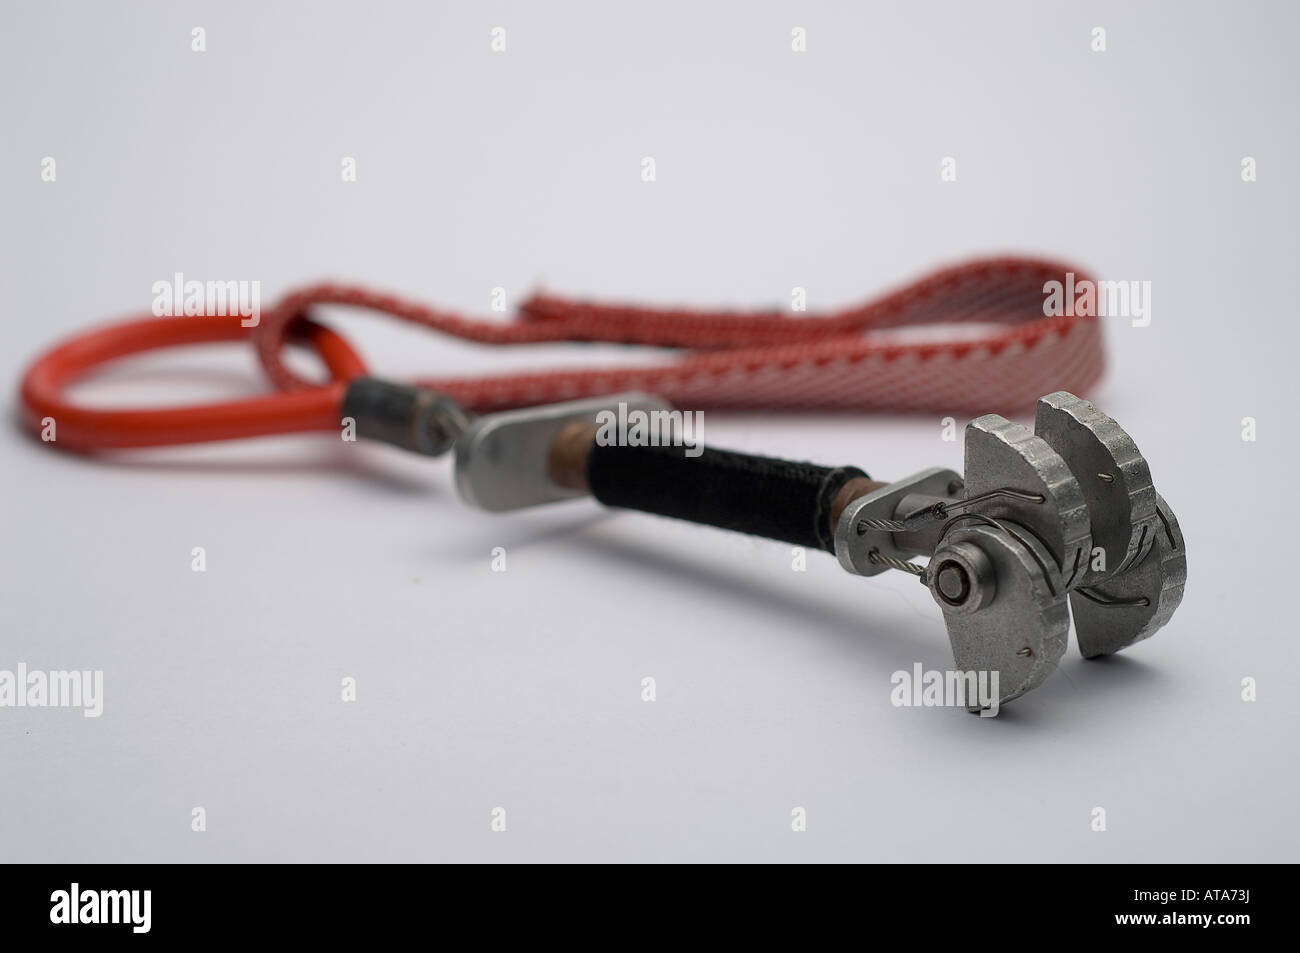 camming device used in rock climbing for protection during a fall Stock Photo